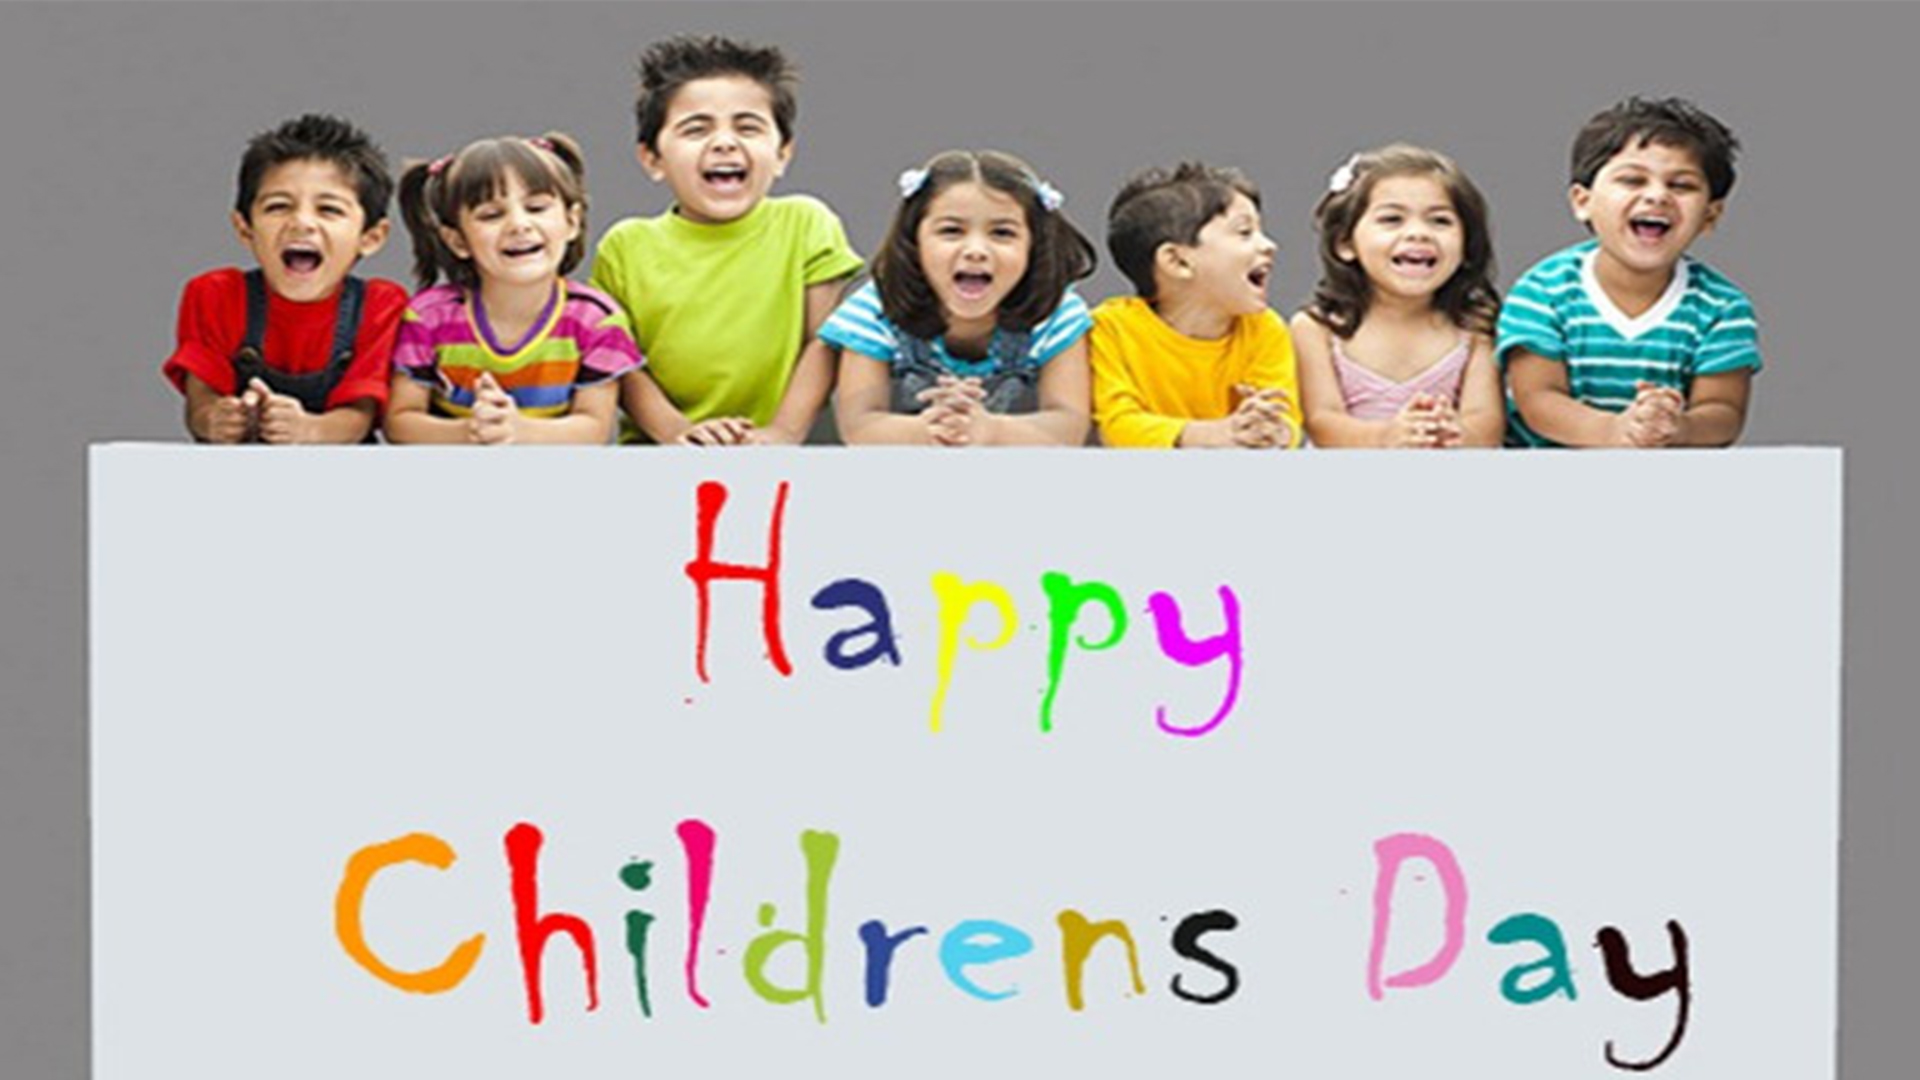 childrens day picture hd 2017